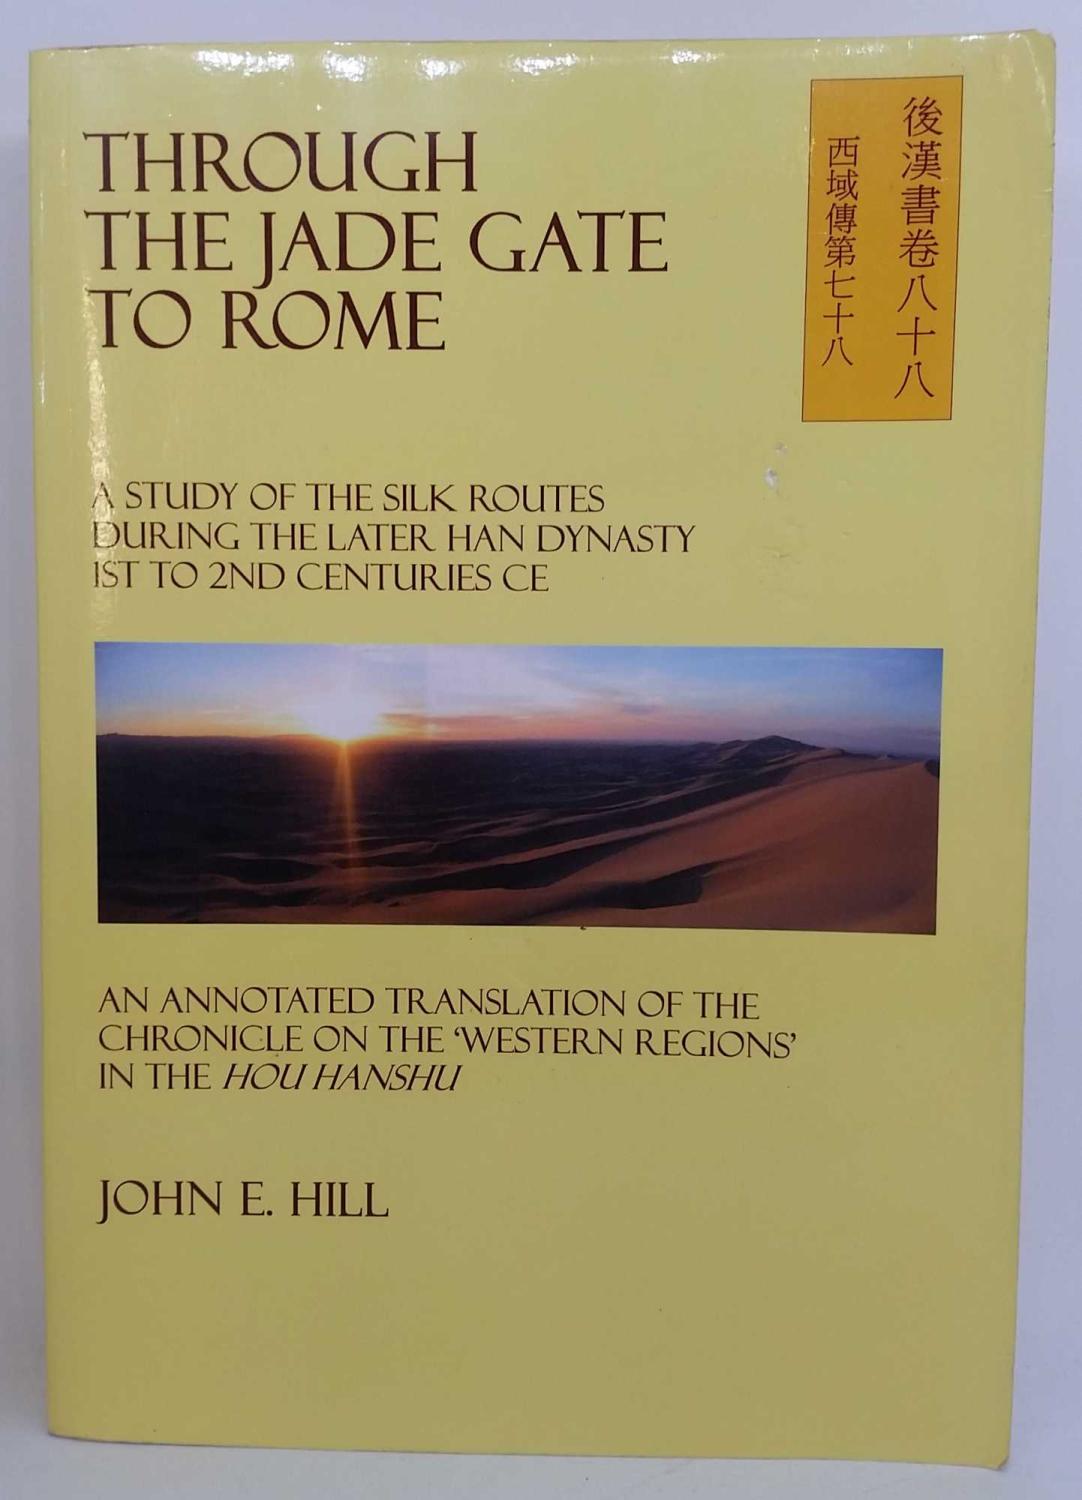 Through the Jade Gate to Rome: A Study of the Silk Routes during the later Han Dynasty, 1st to 2nd Centuries CE - John E. Hill